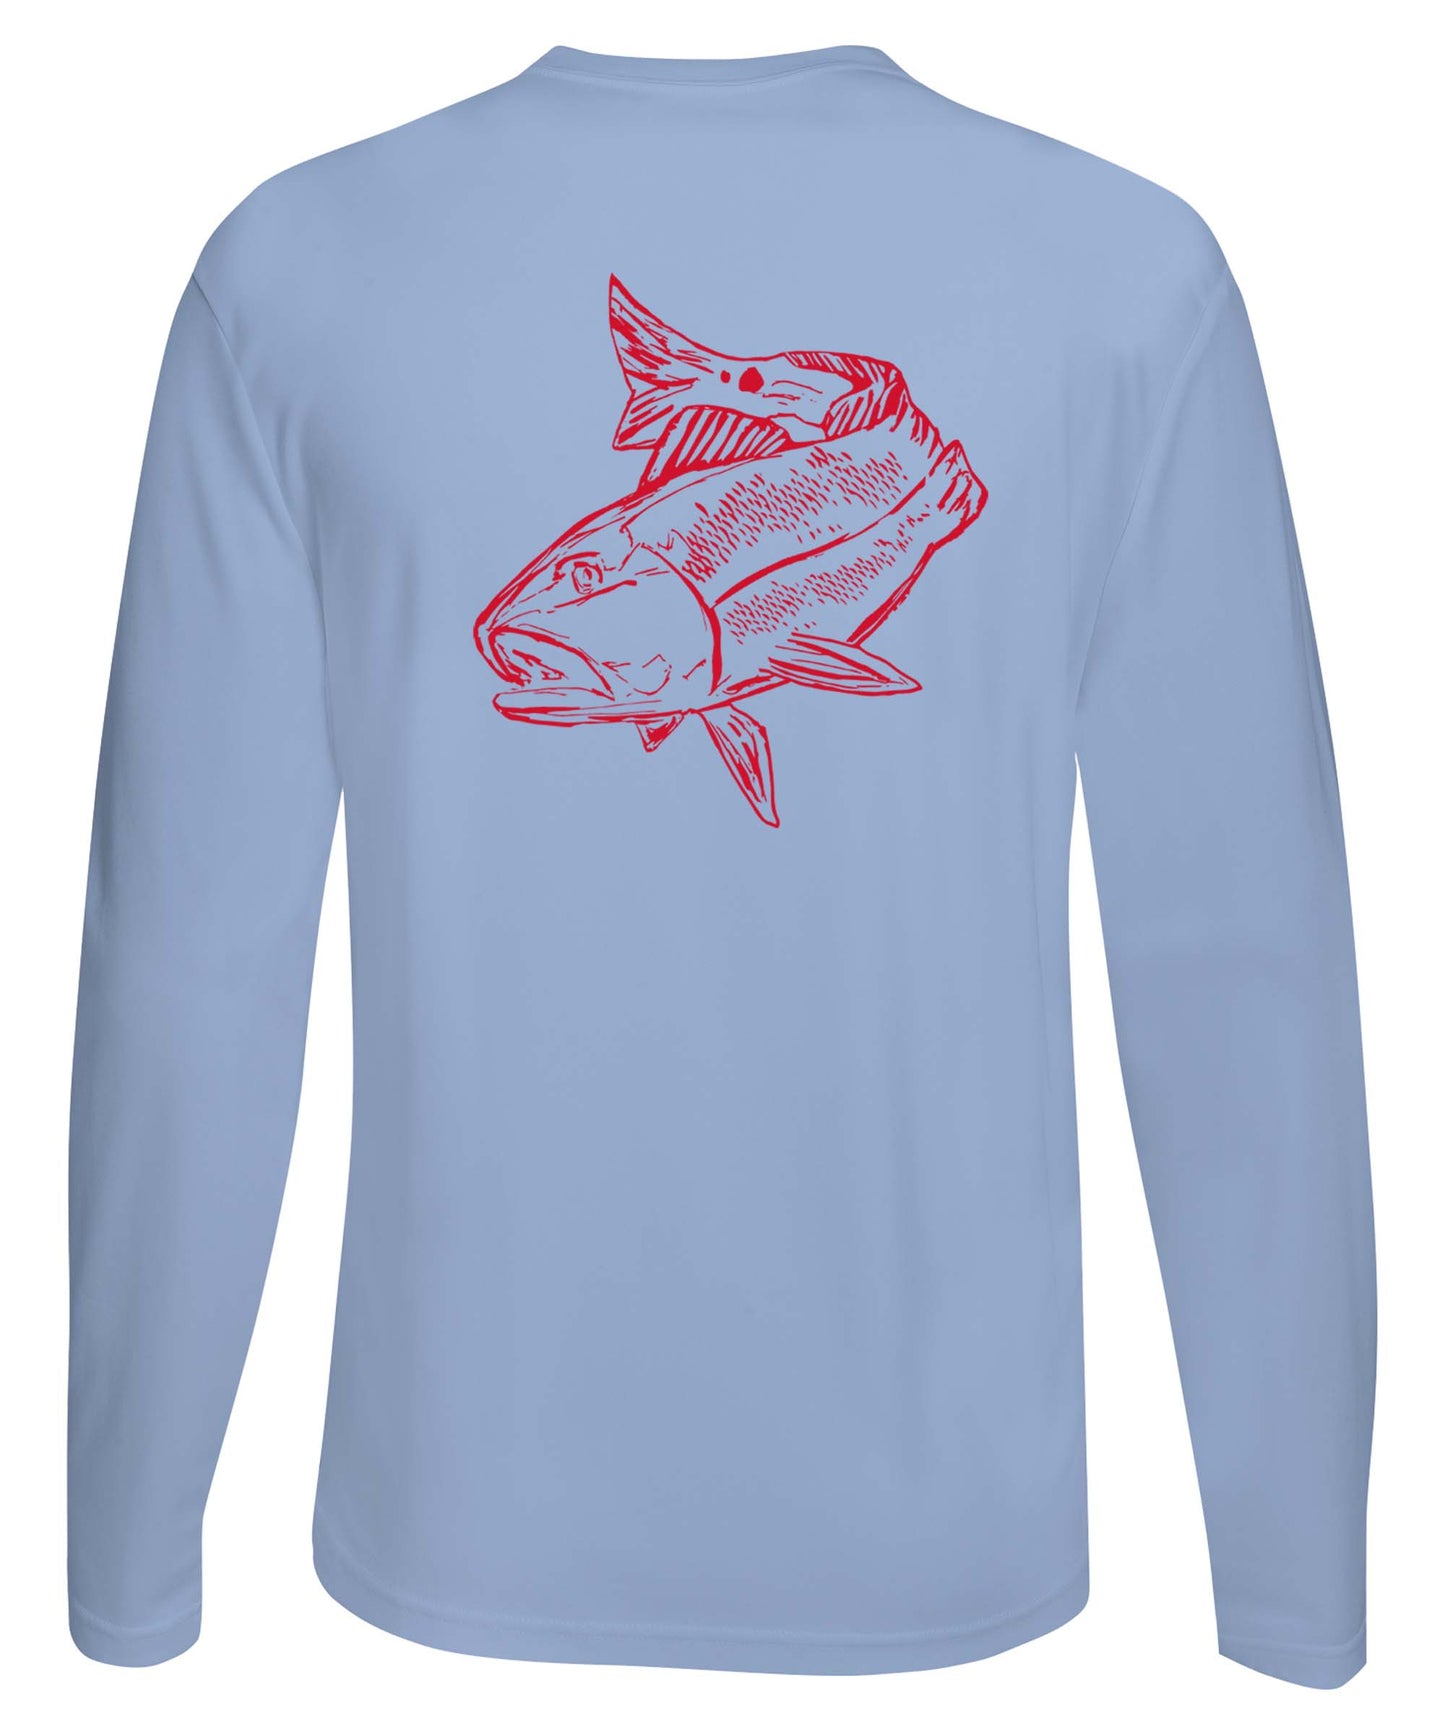 Redfish Performance Dry-Fit Fishing shirts with Sun Protection - Lt. Blue Long Sleeve